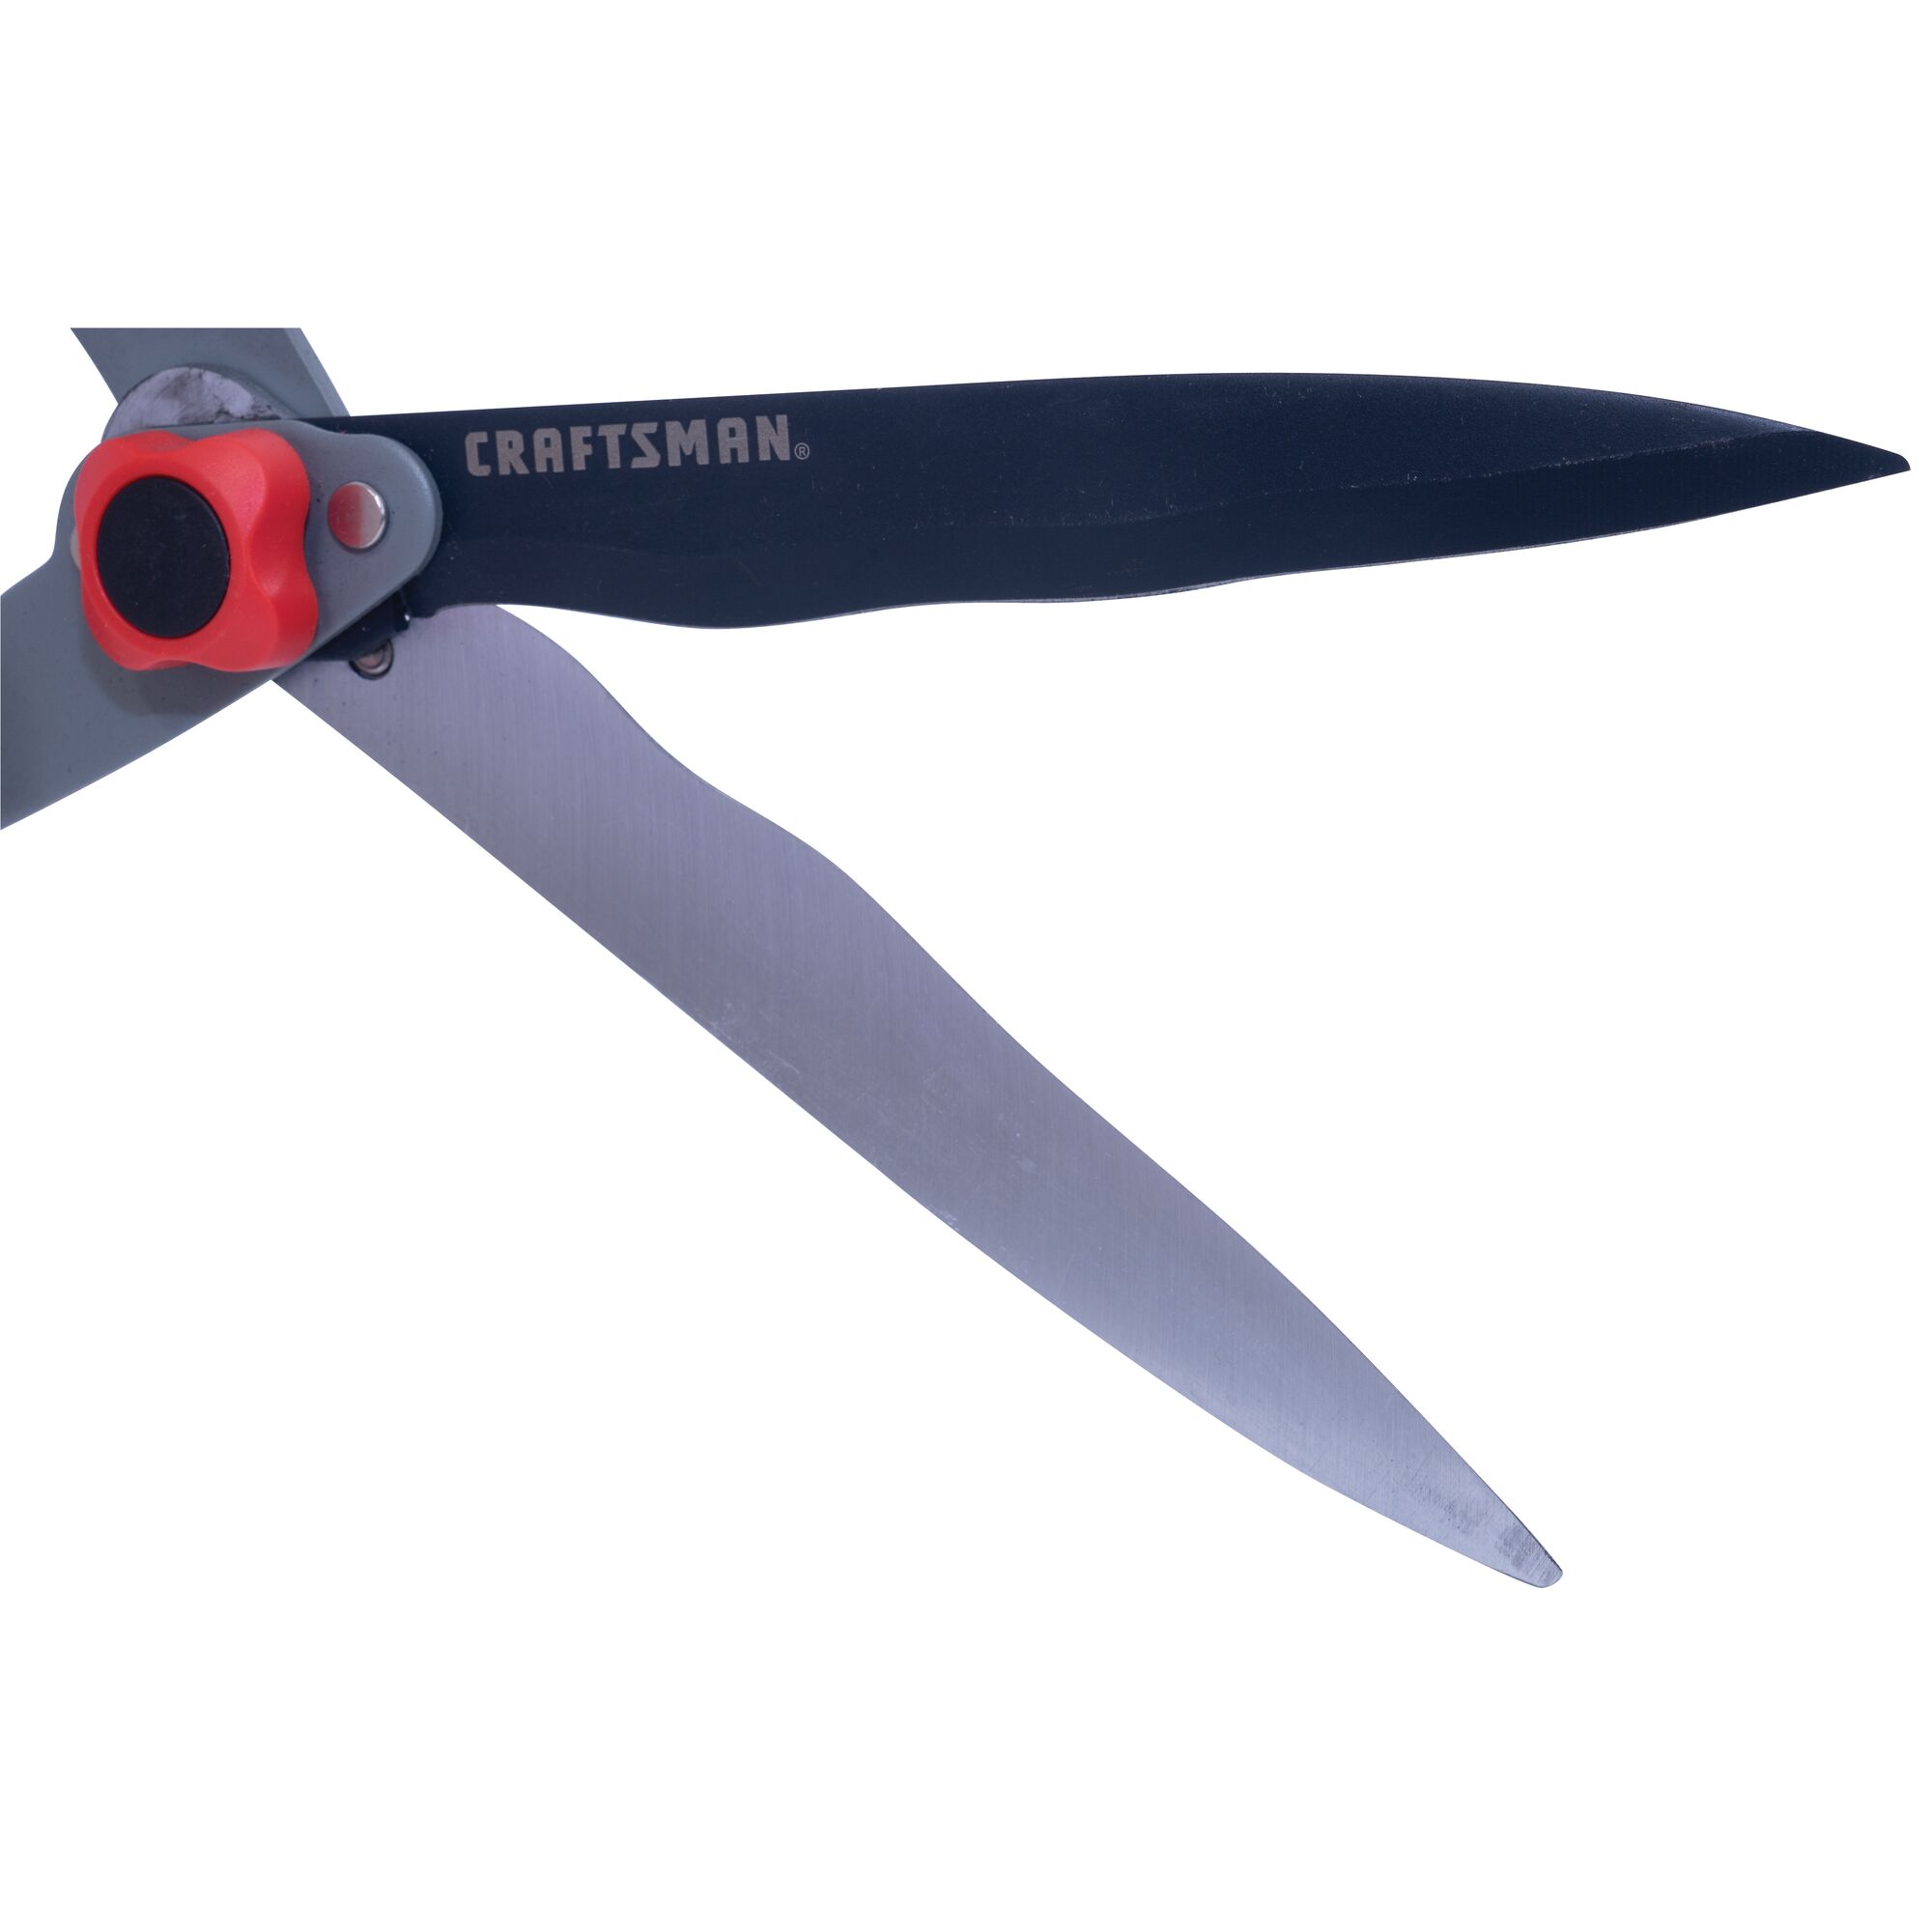 Non-stick blade coating feature of hedge shears.